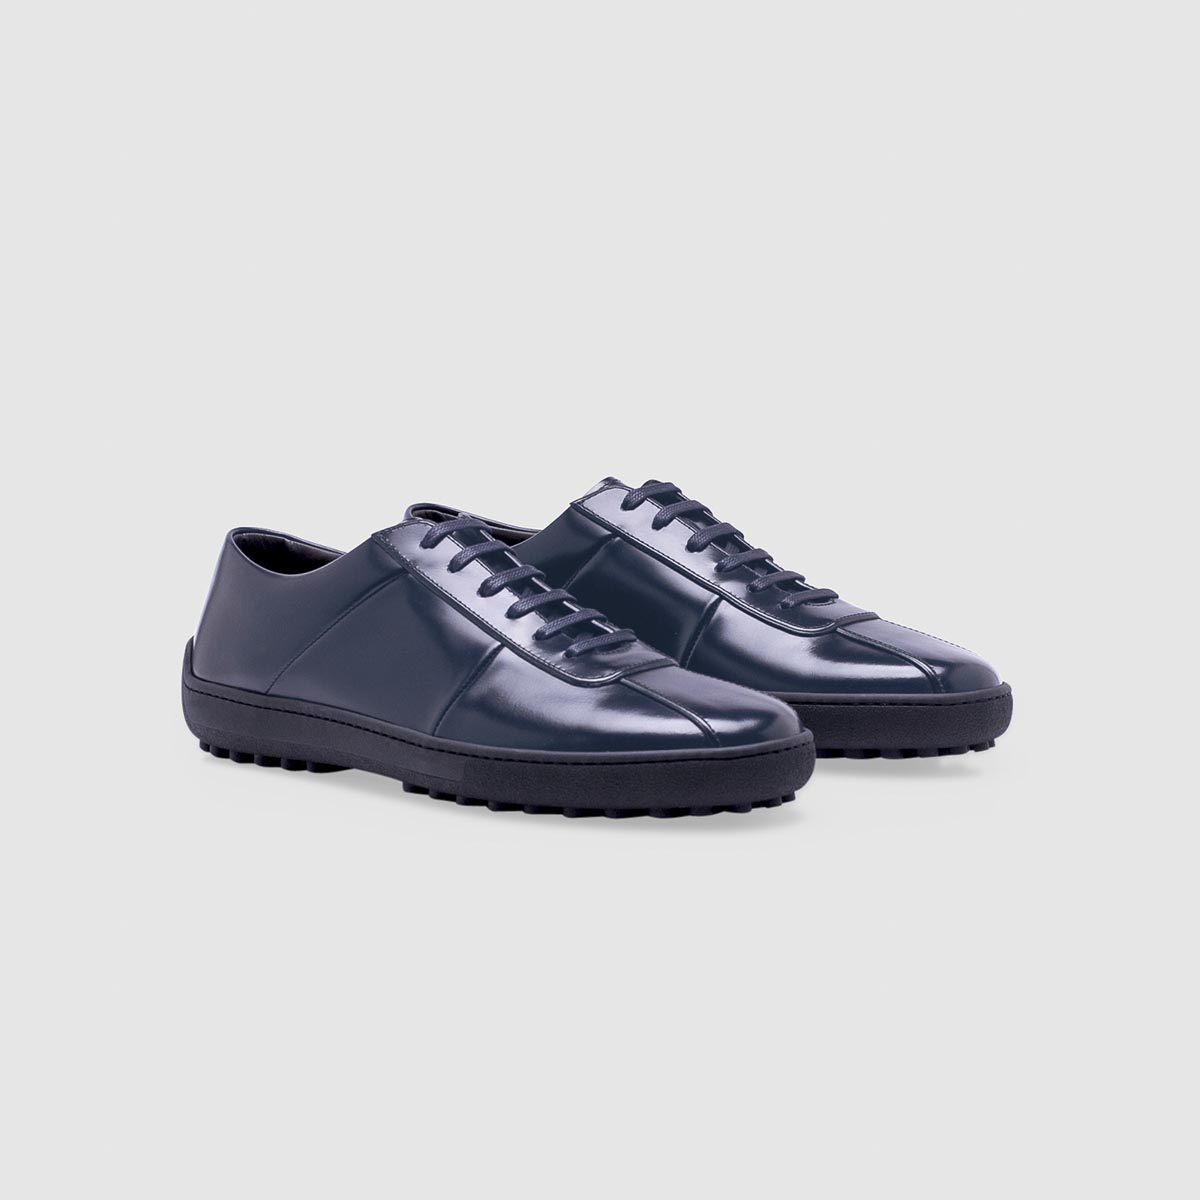 Blue sneaker in polished leather Calò on sale 2022 2